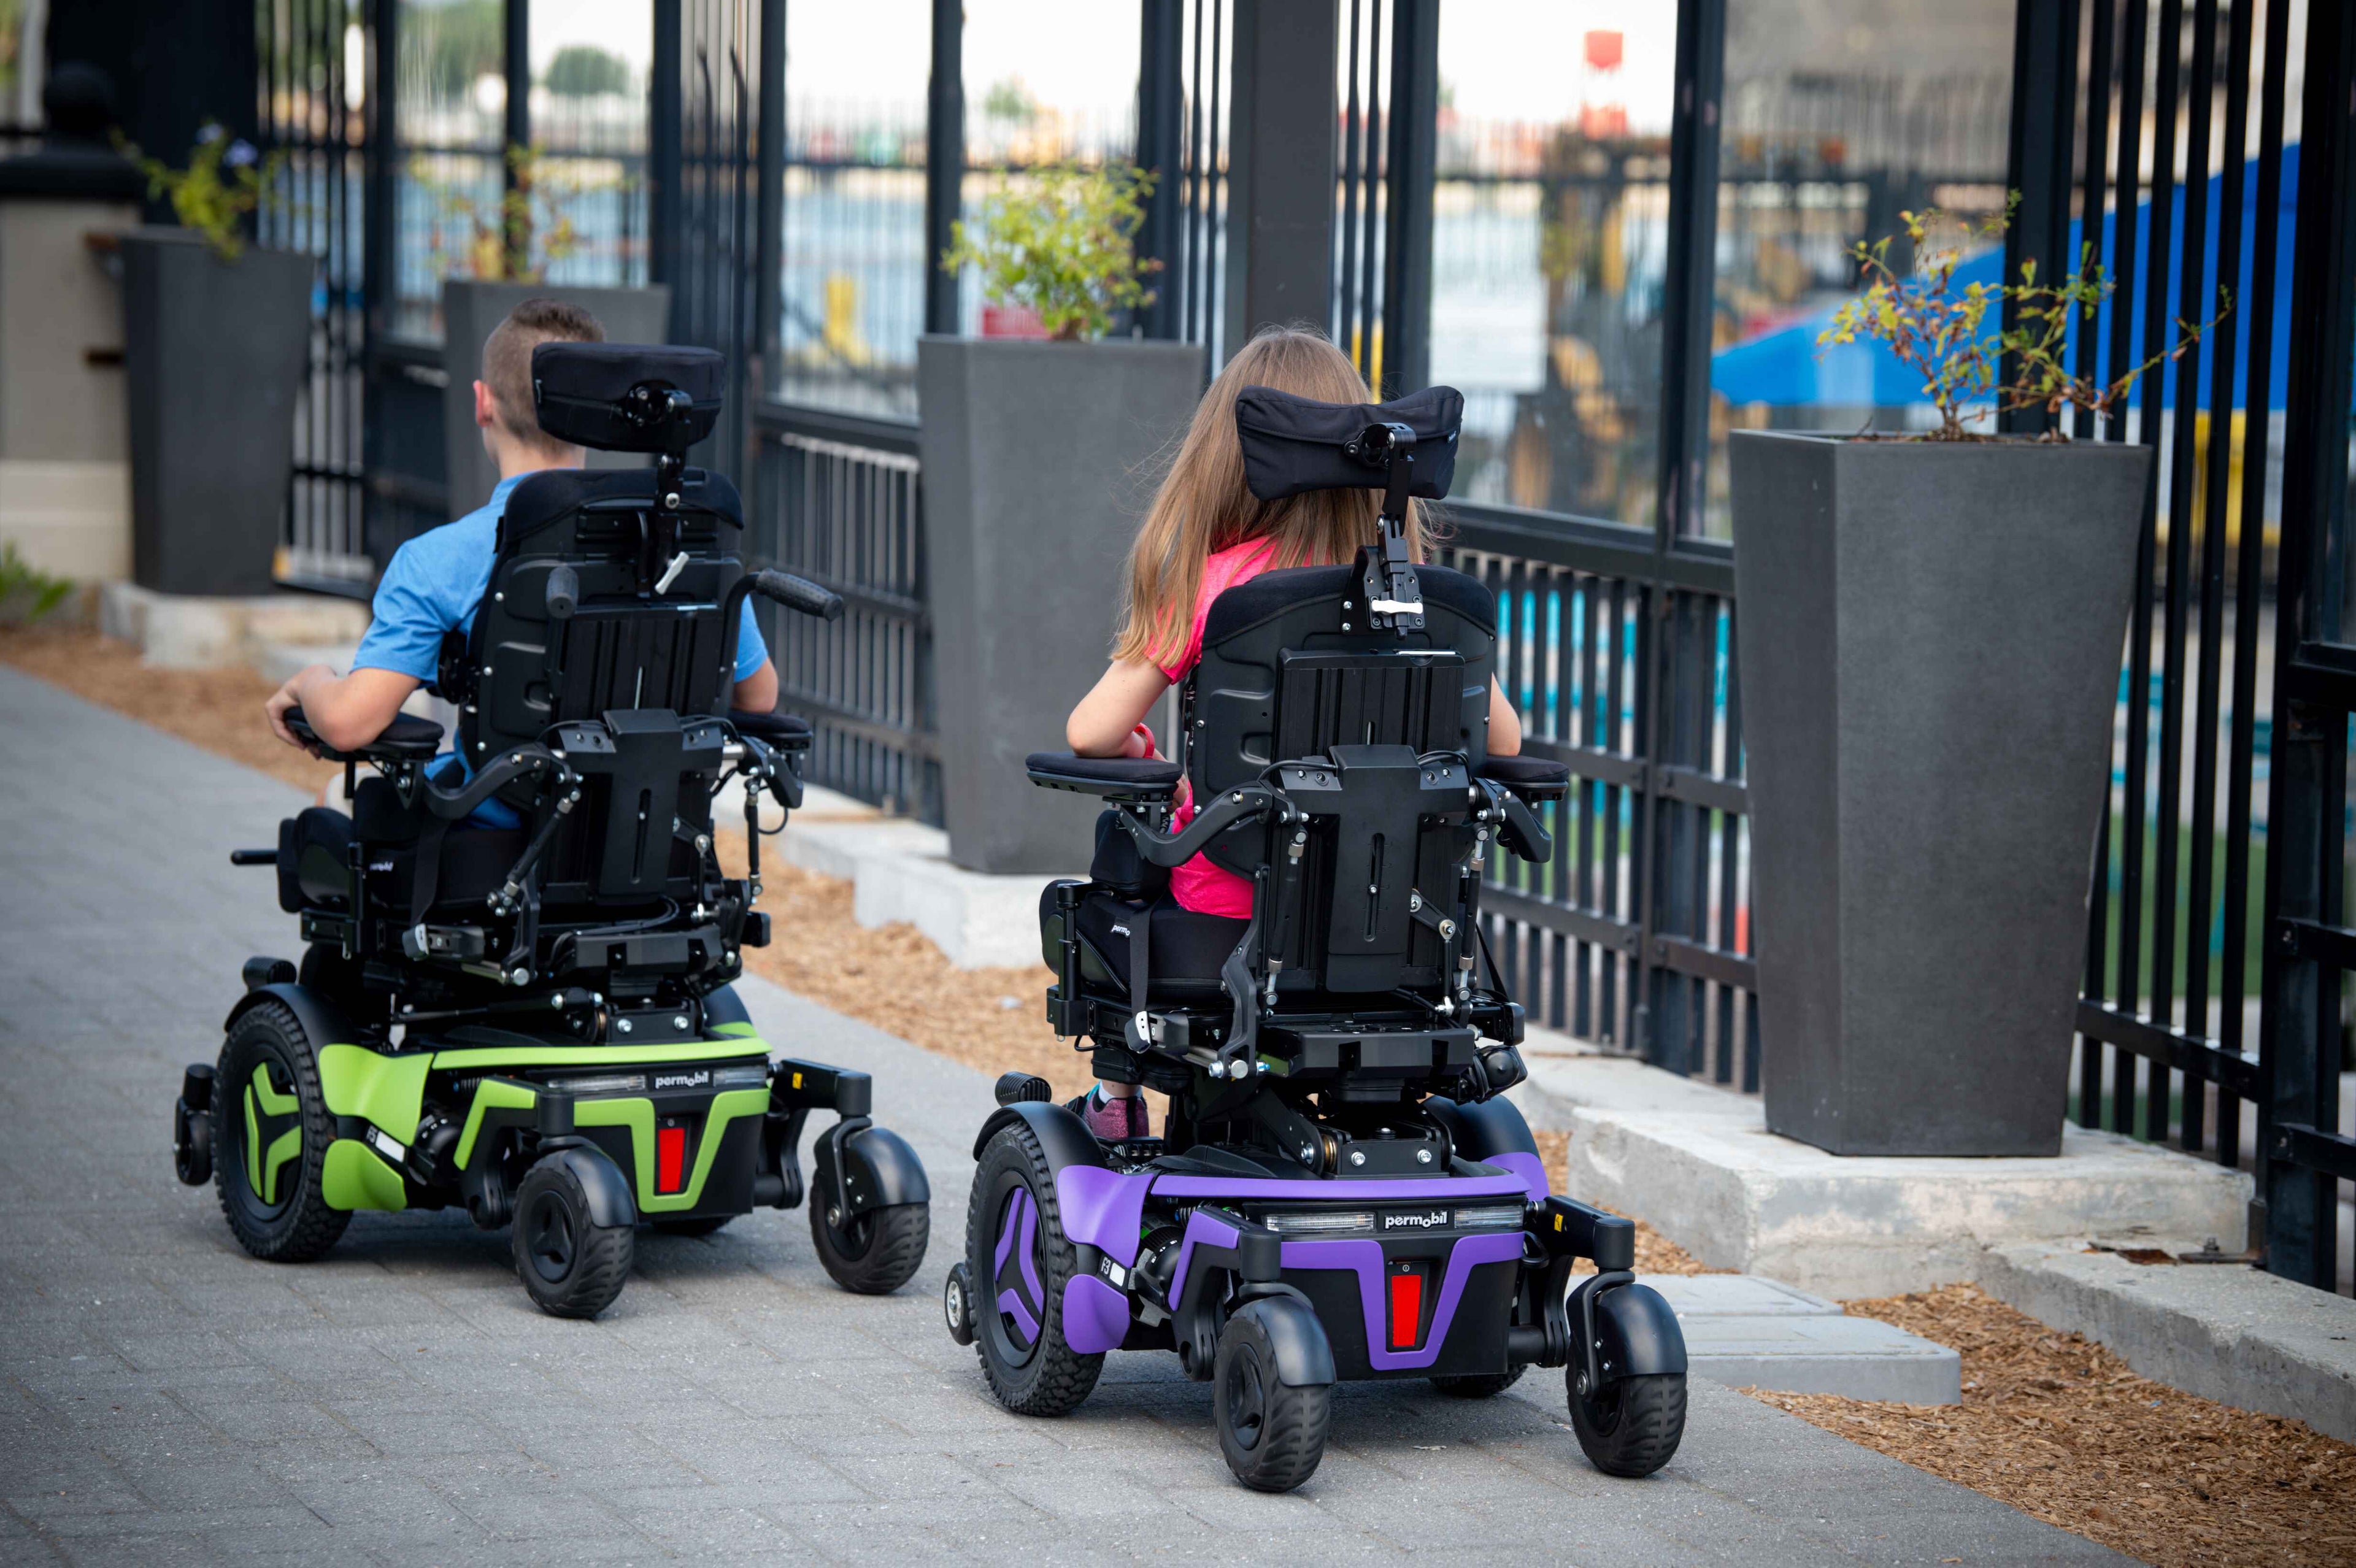 Permobil Wheelchairs - Beyond Mobility.